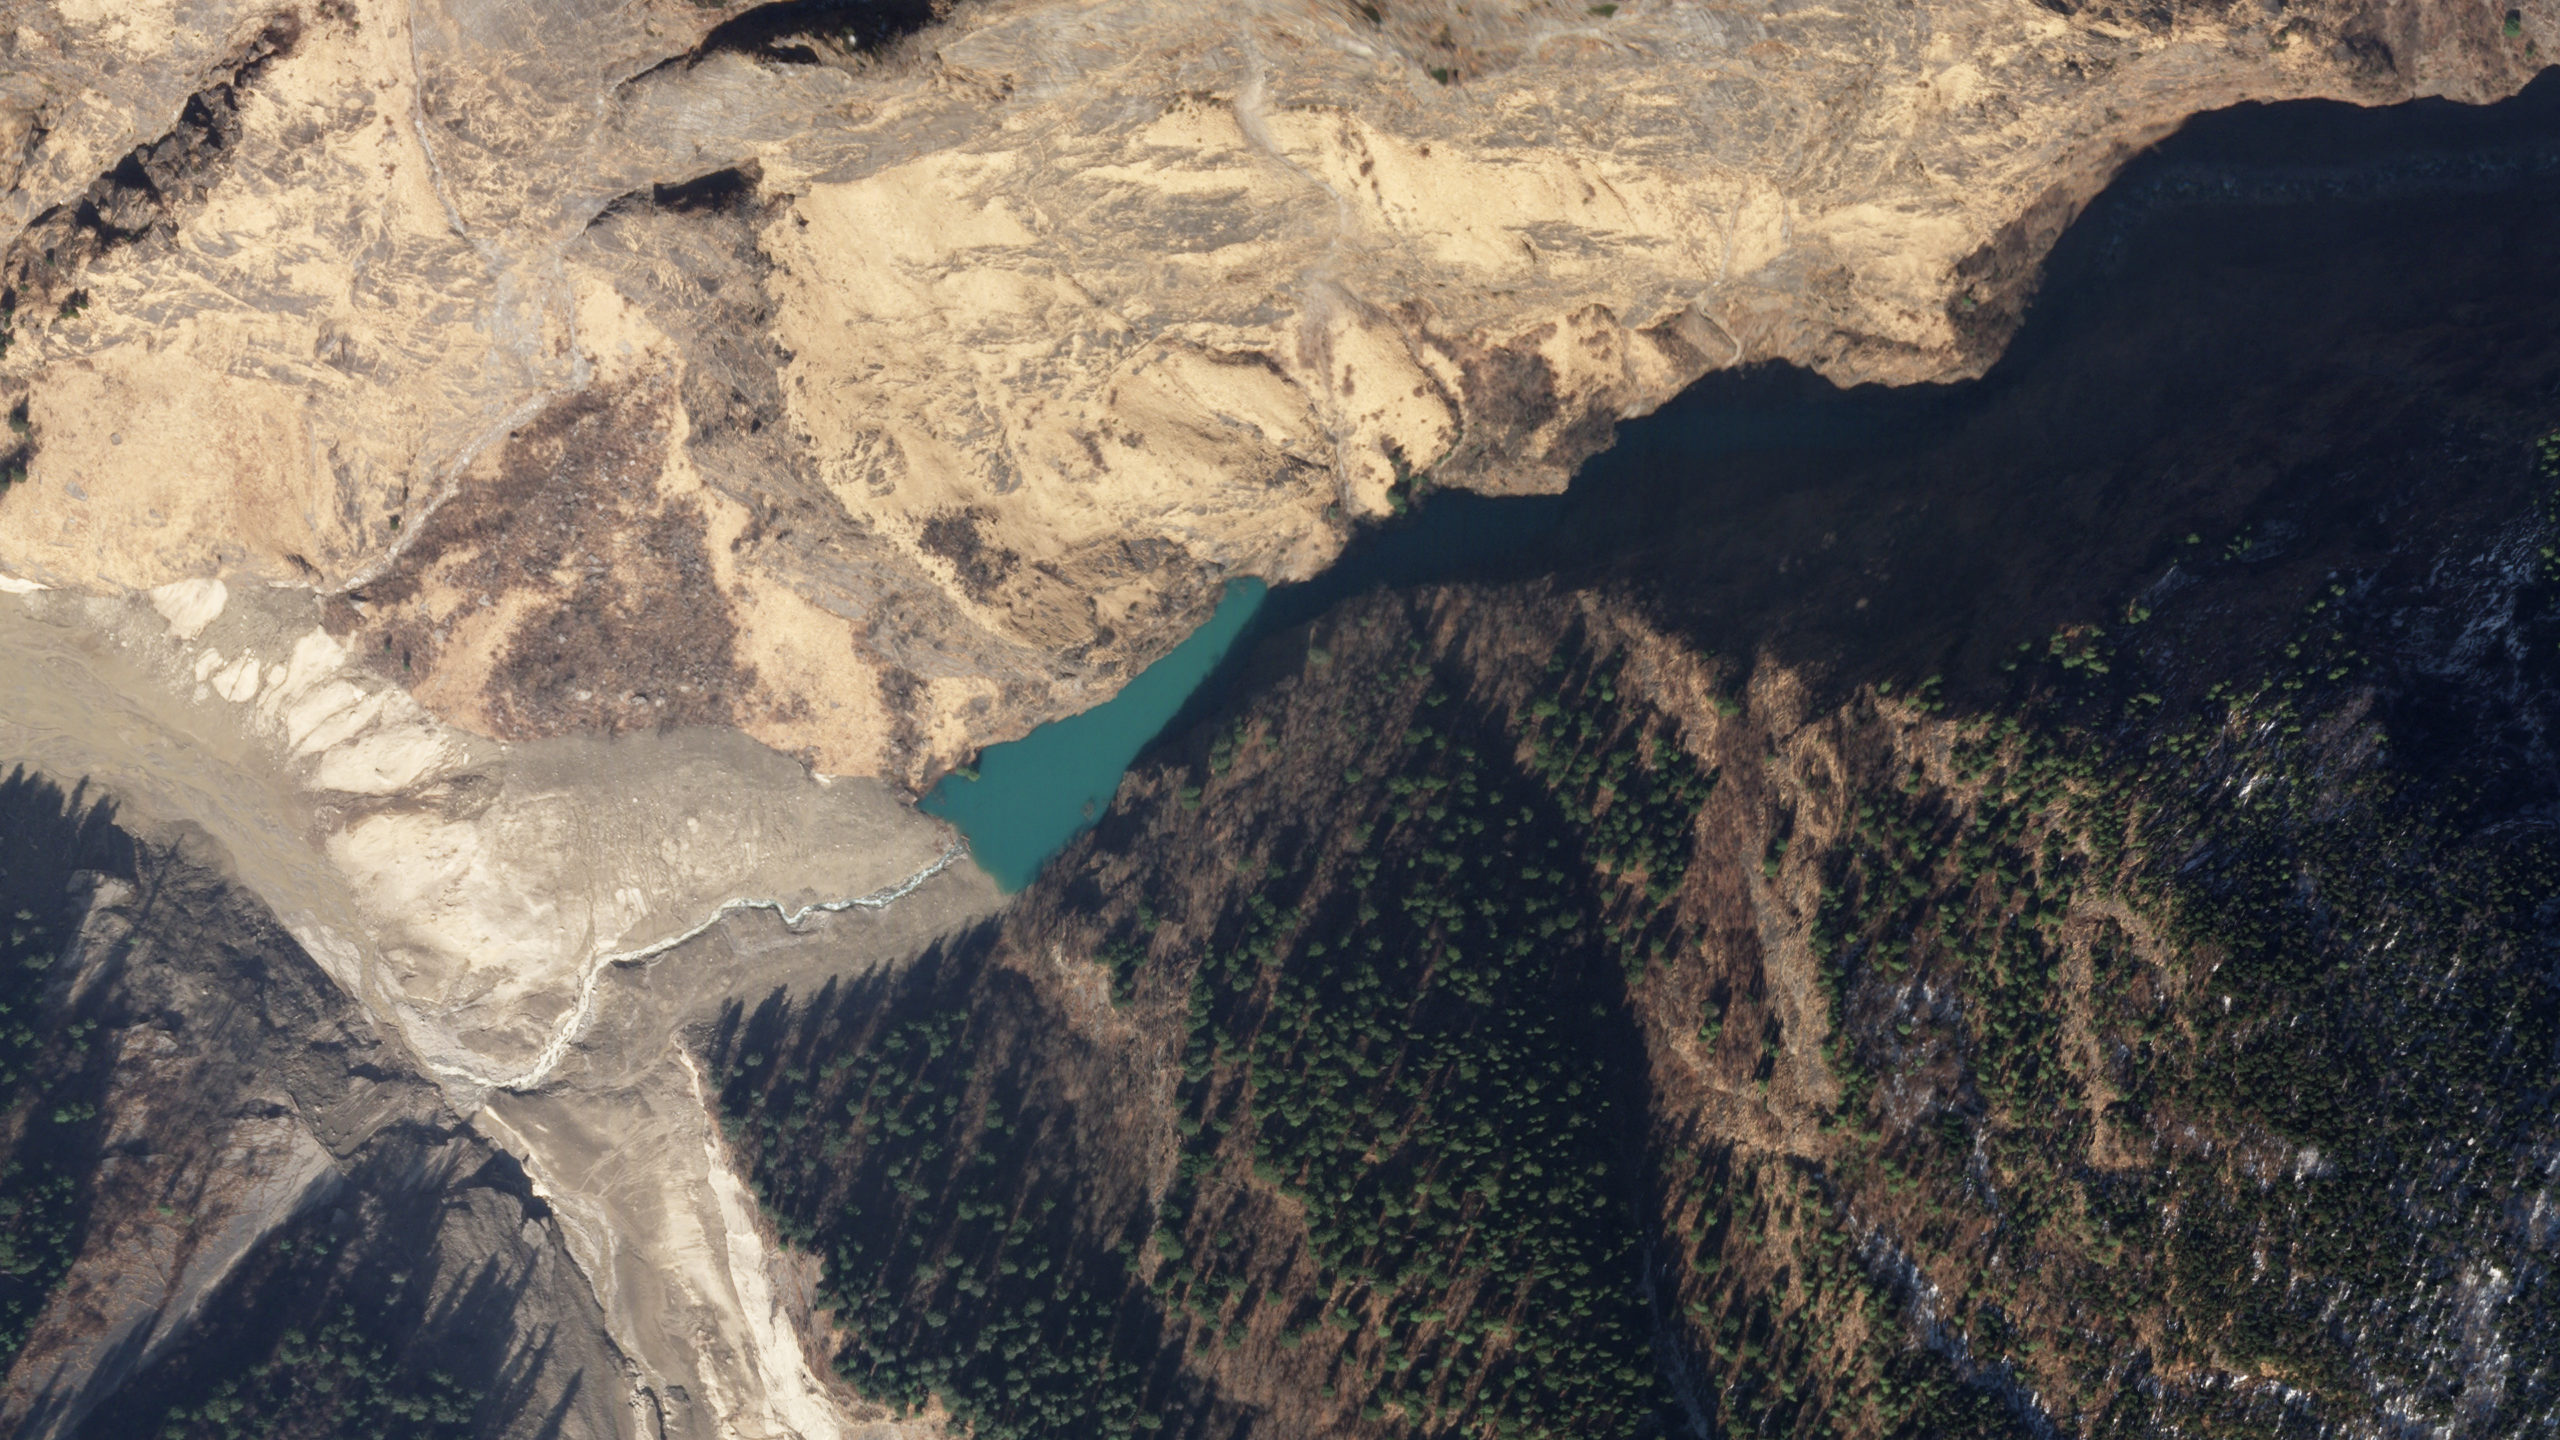 A perspective view of the landslide dam on the Rishi Ganga